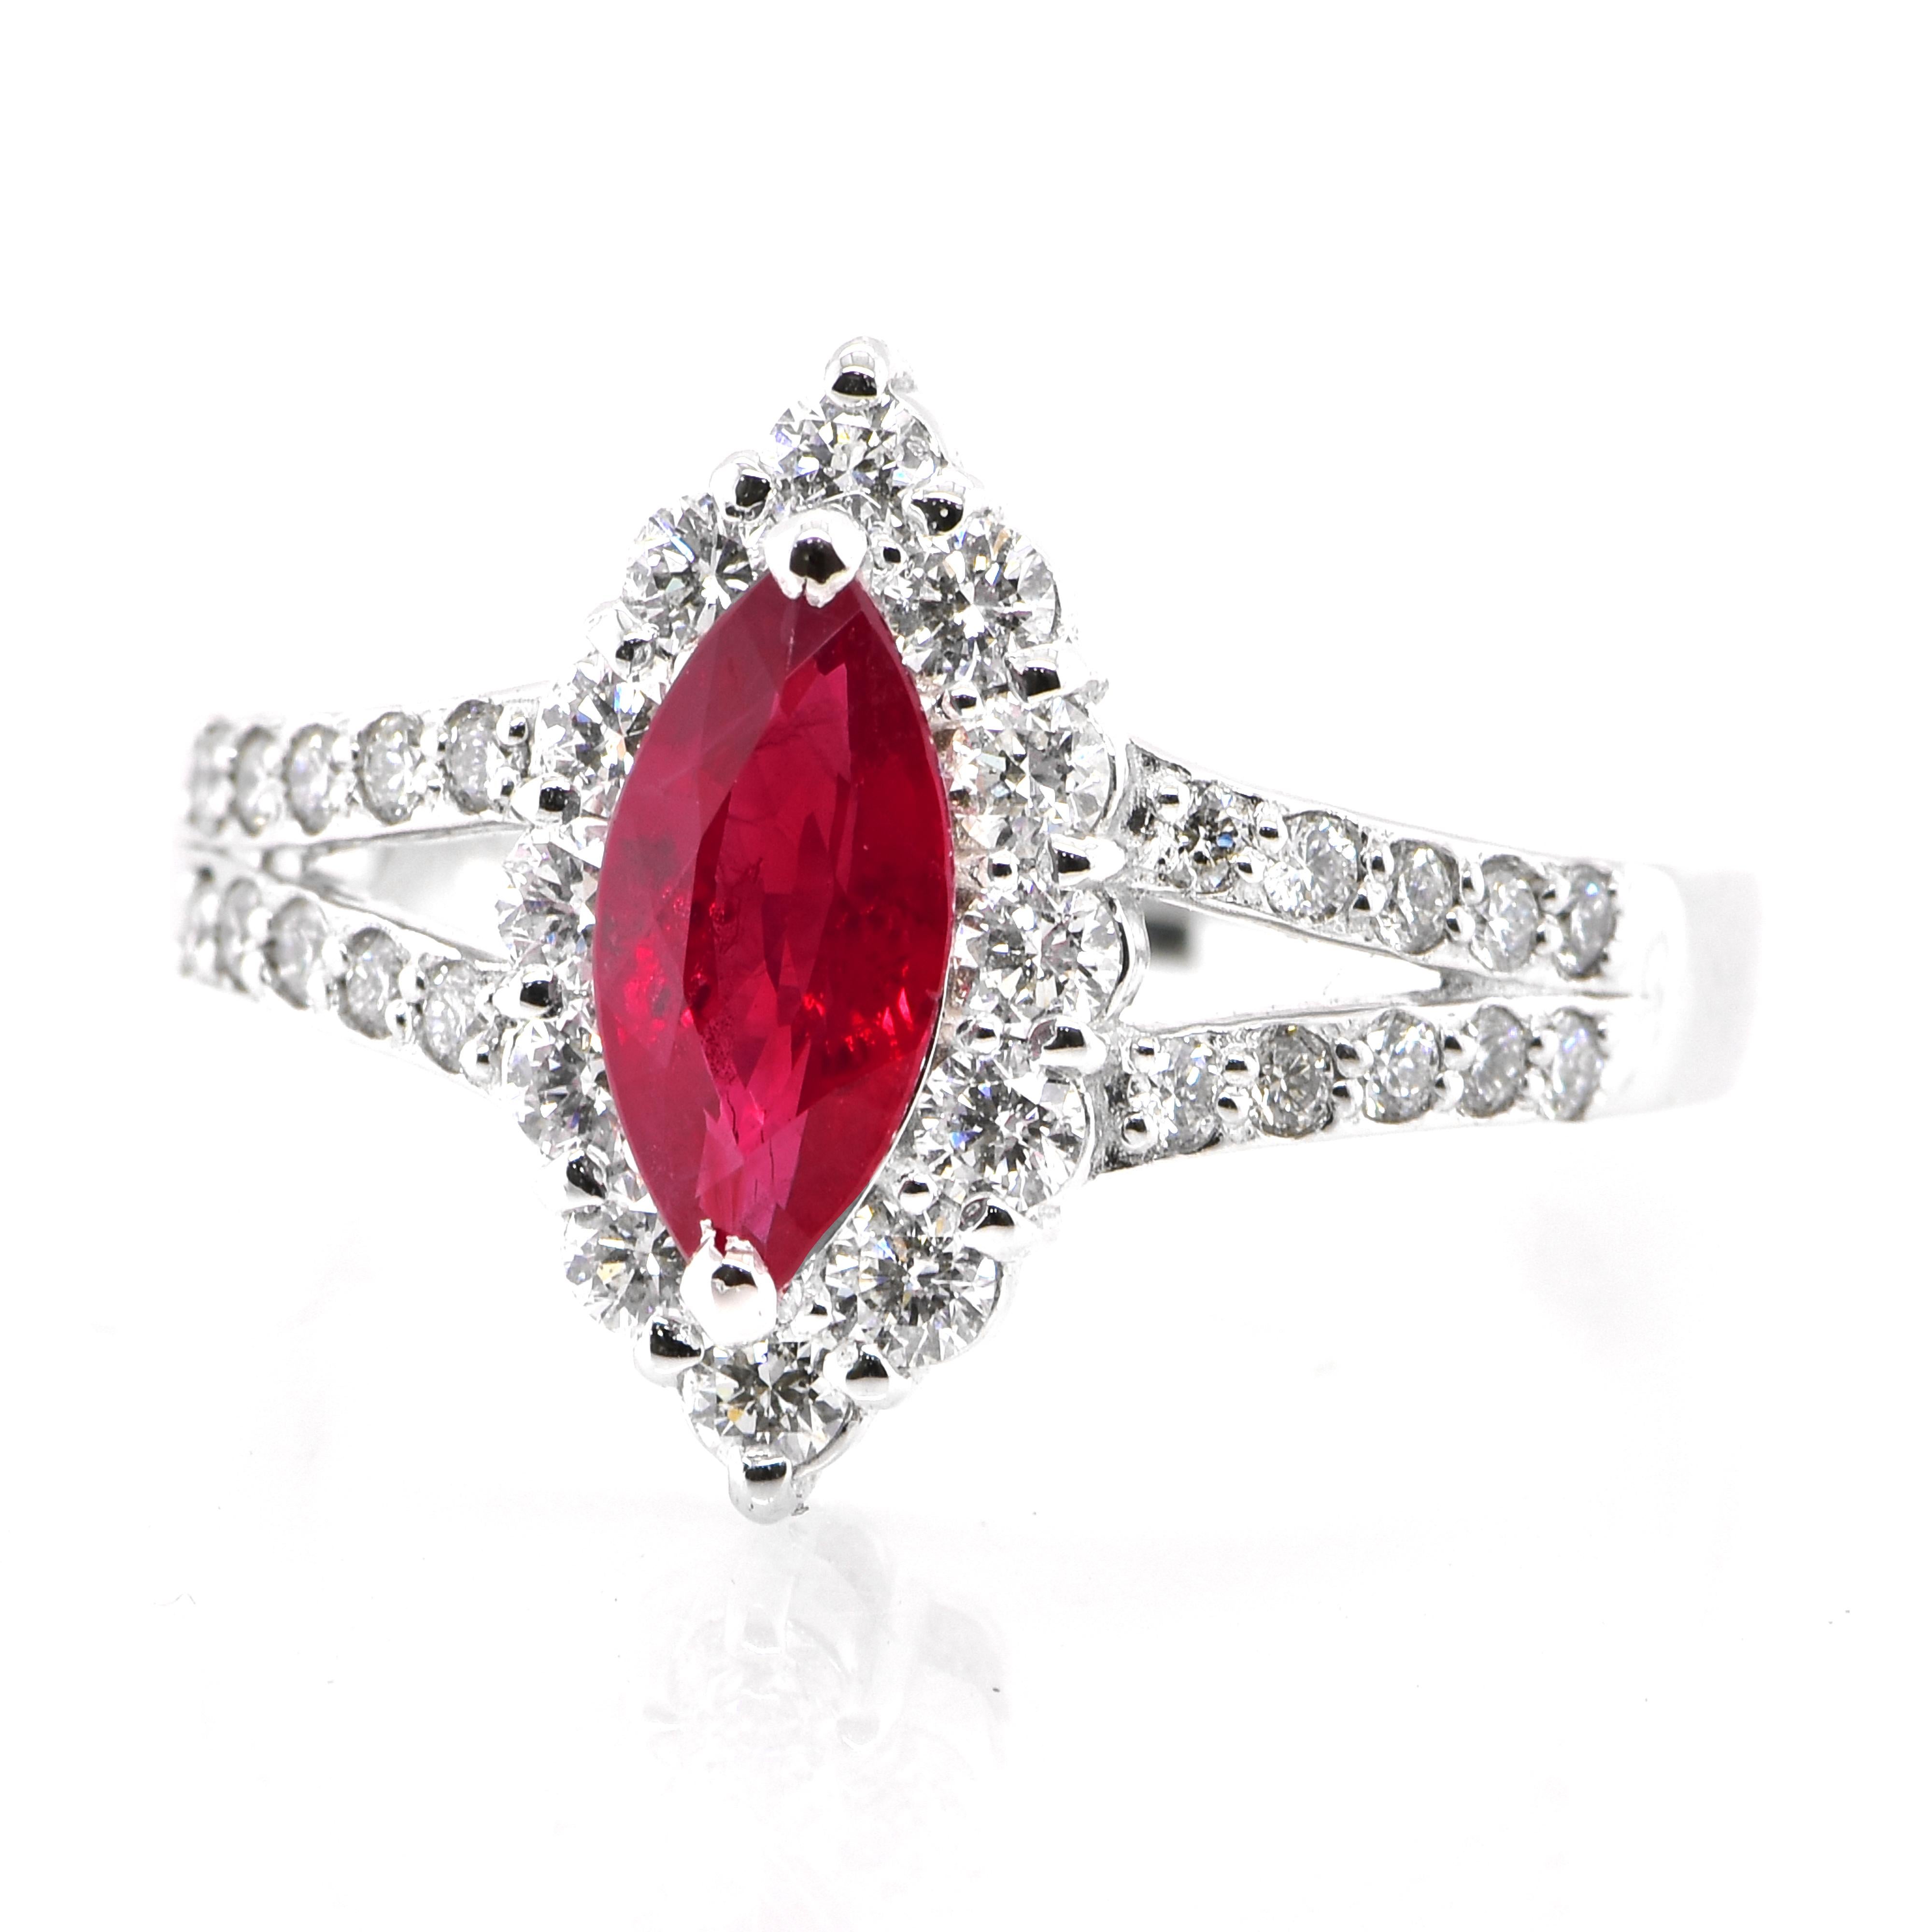 A beautiful GIA Certified 1.02 Carat Burmese Origin, Pigeon's Blood Ruby and 0.62 Carat Diamonds set in Platinum. Rubies are referred to as 